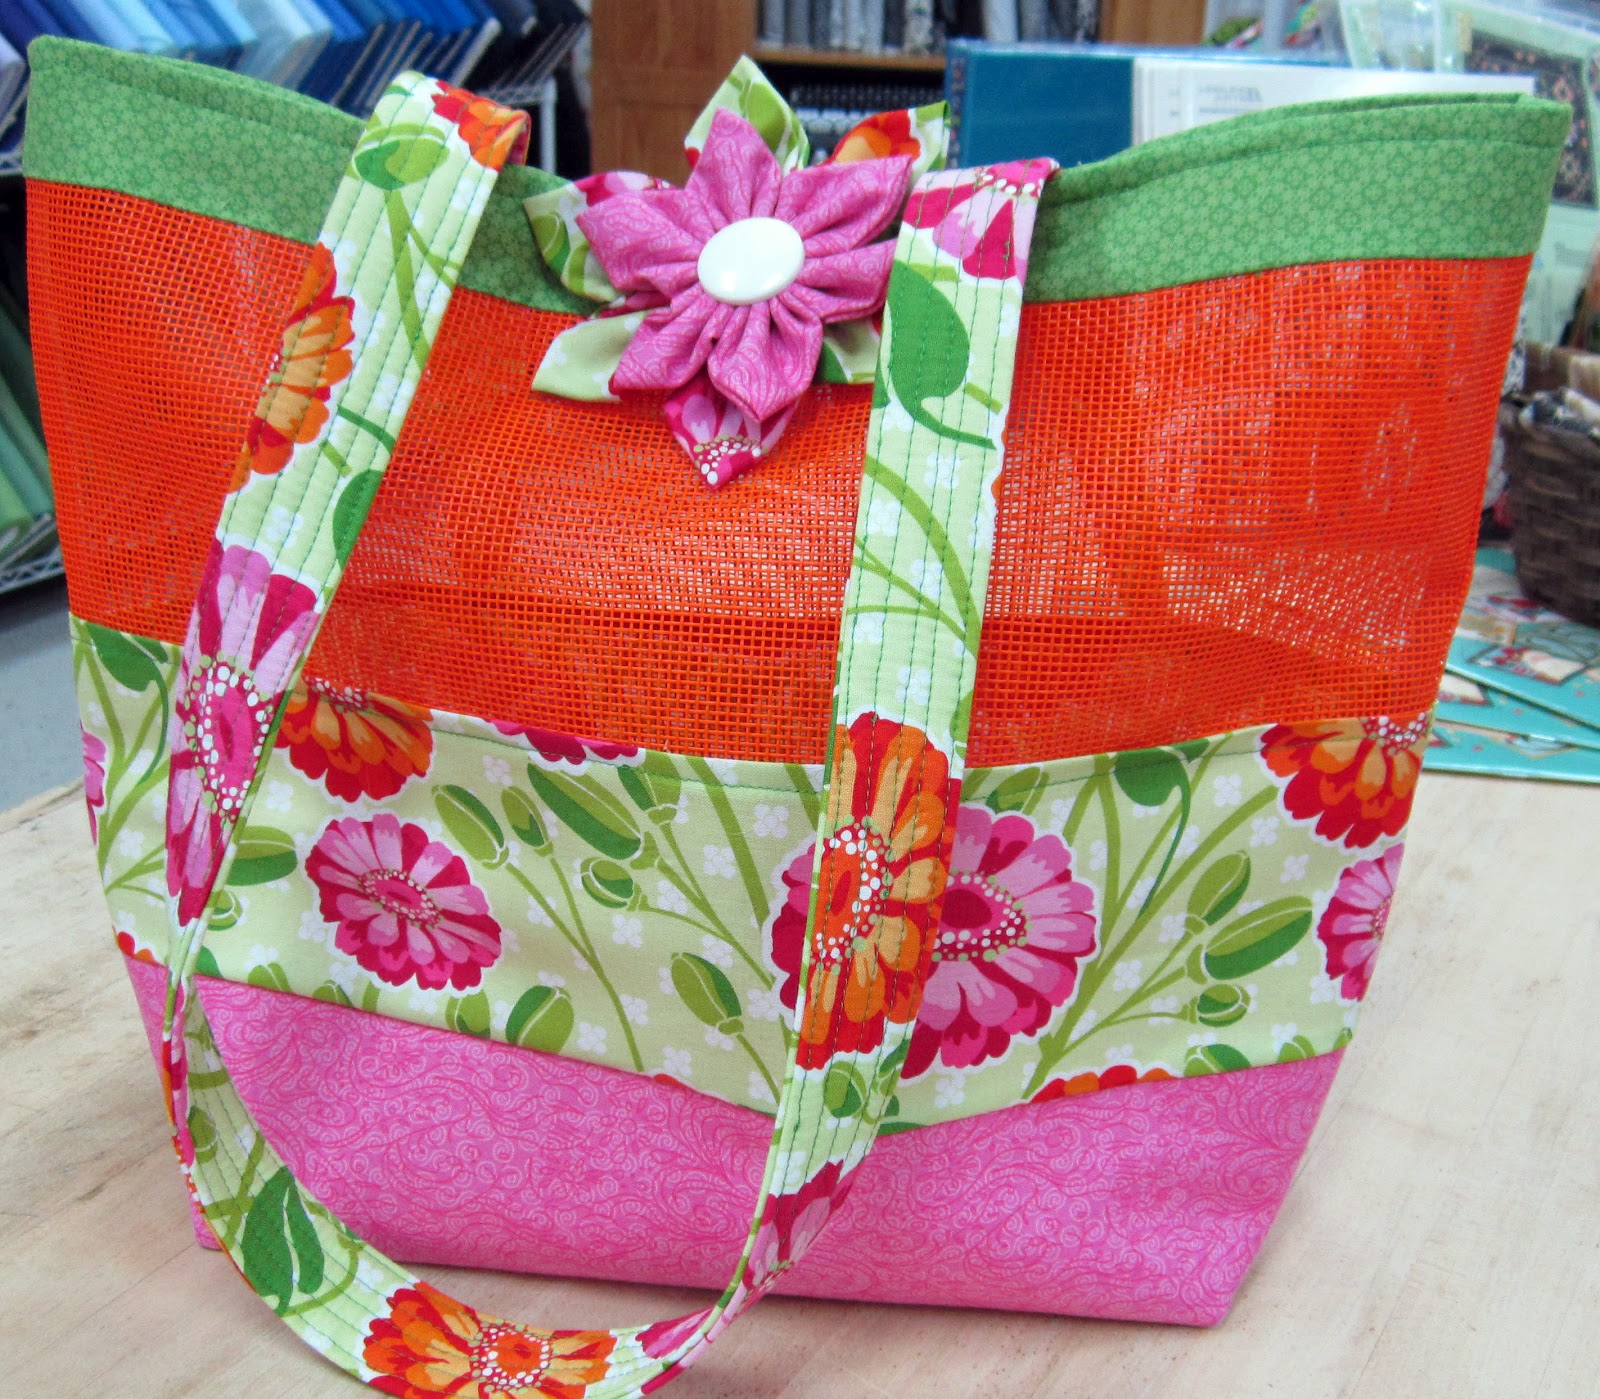 Bags are the big deal at Calico Mermaid this spring.